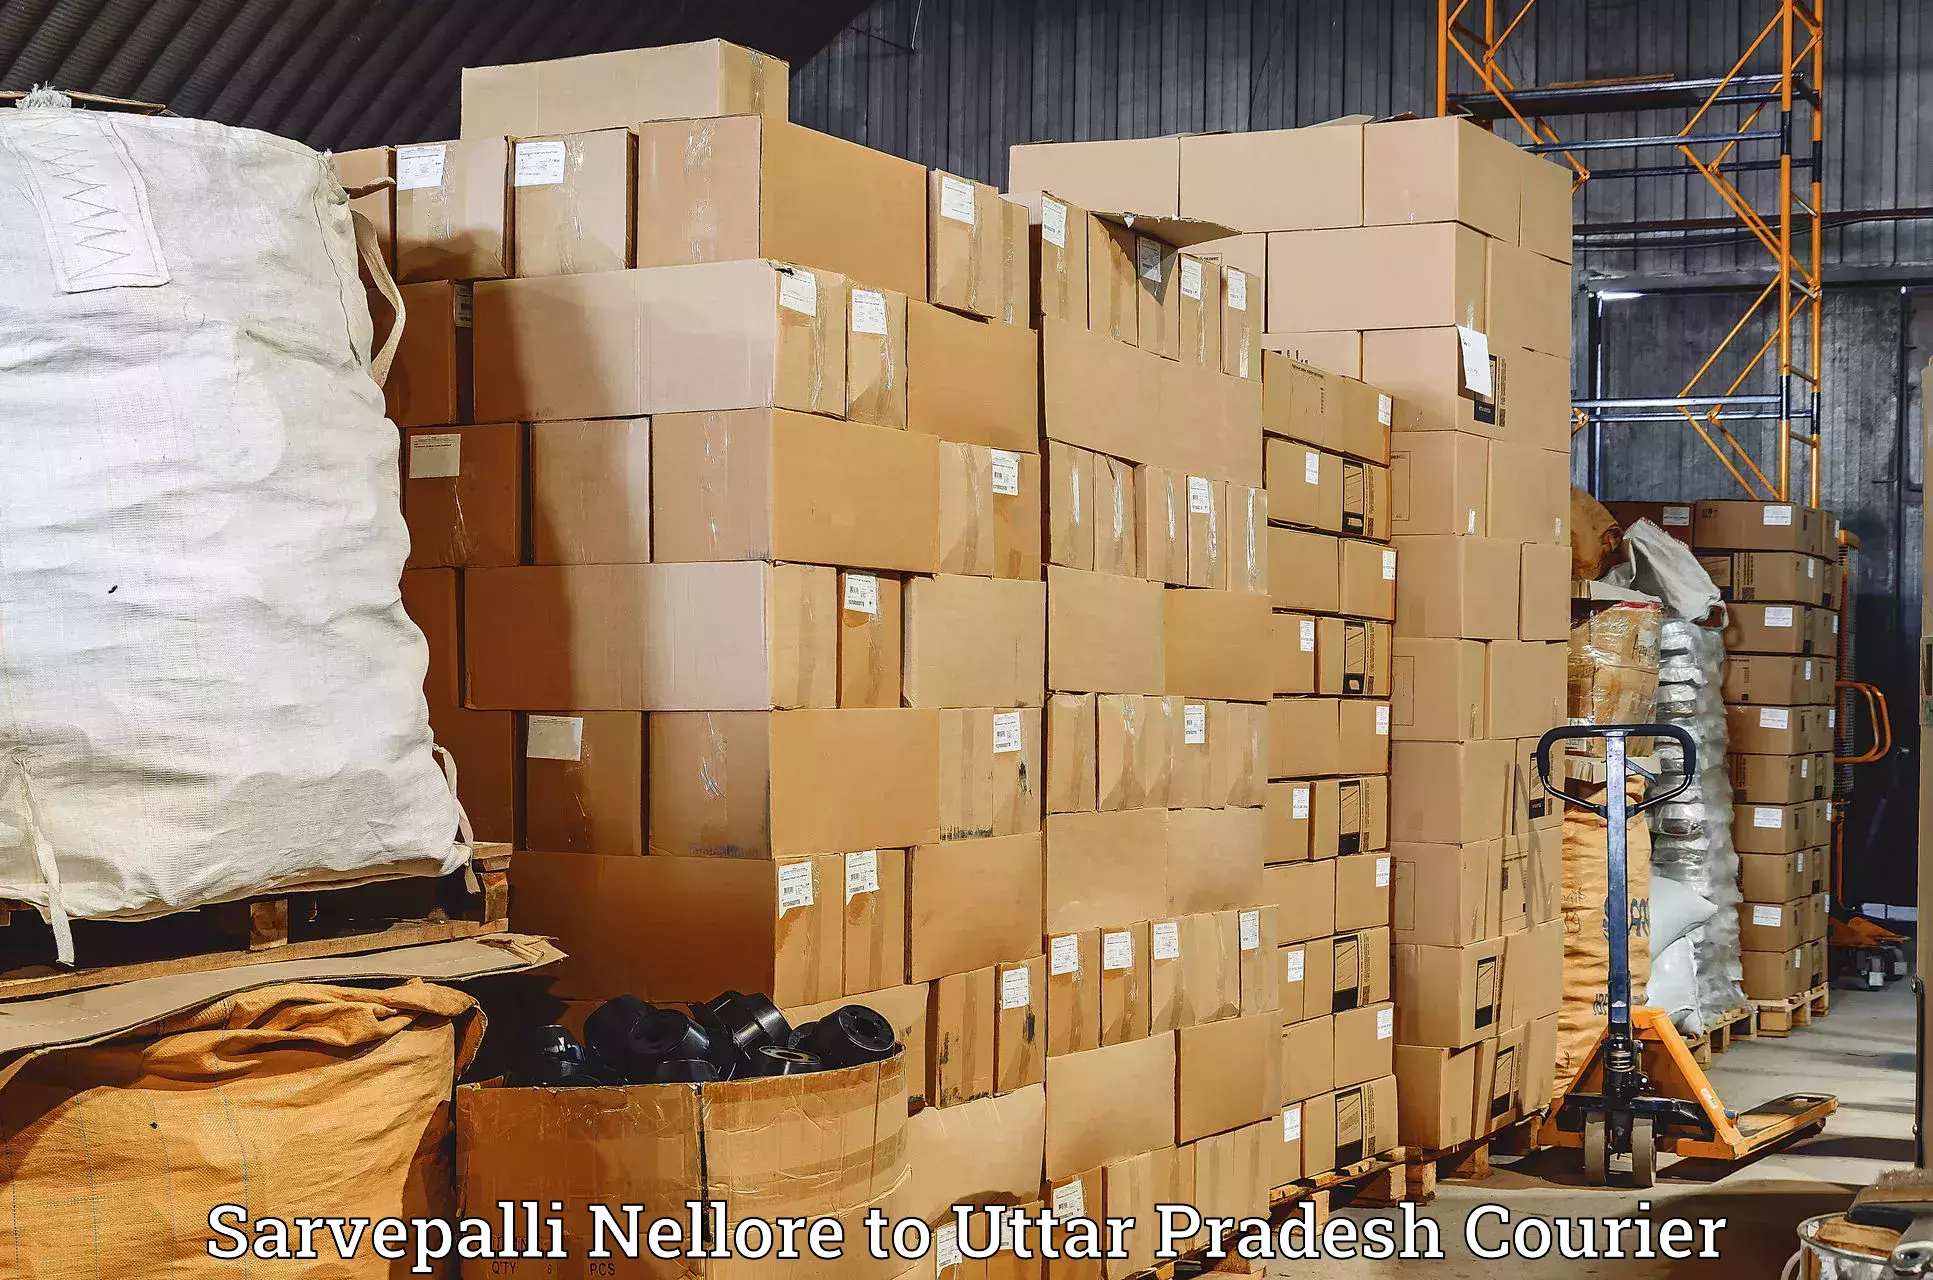 Reliable shipping partners Sarvepalli Nellore to Khair